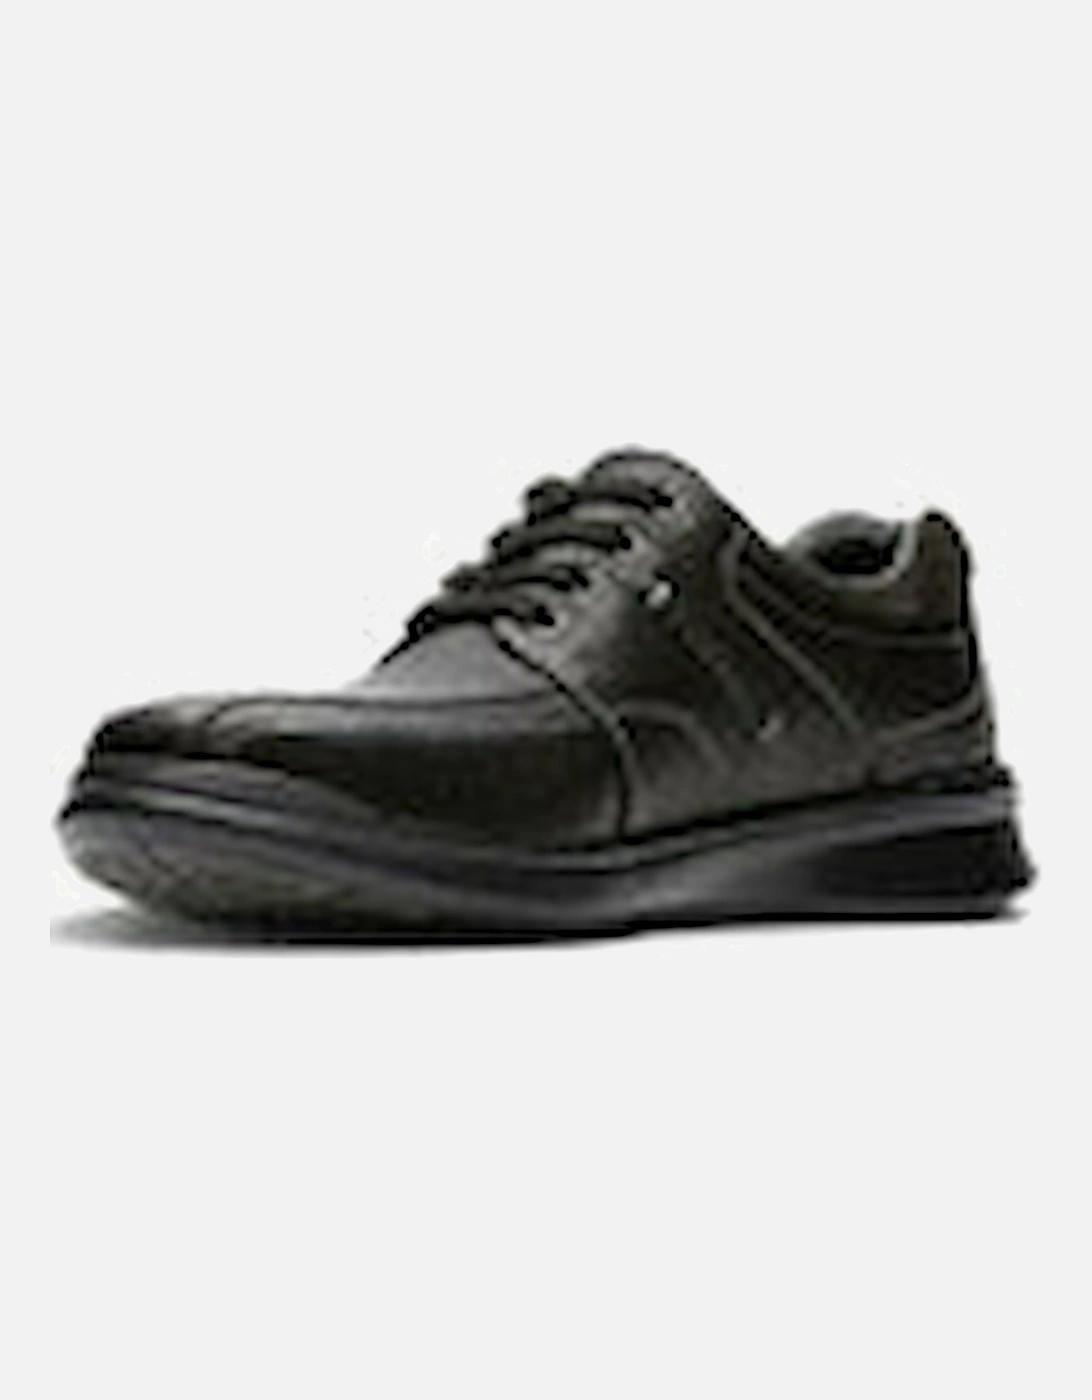 Cotrell Walk in black oily leather